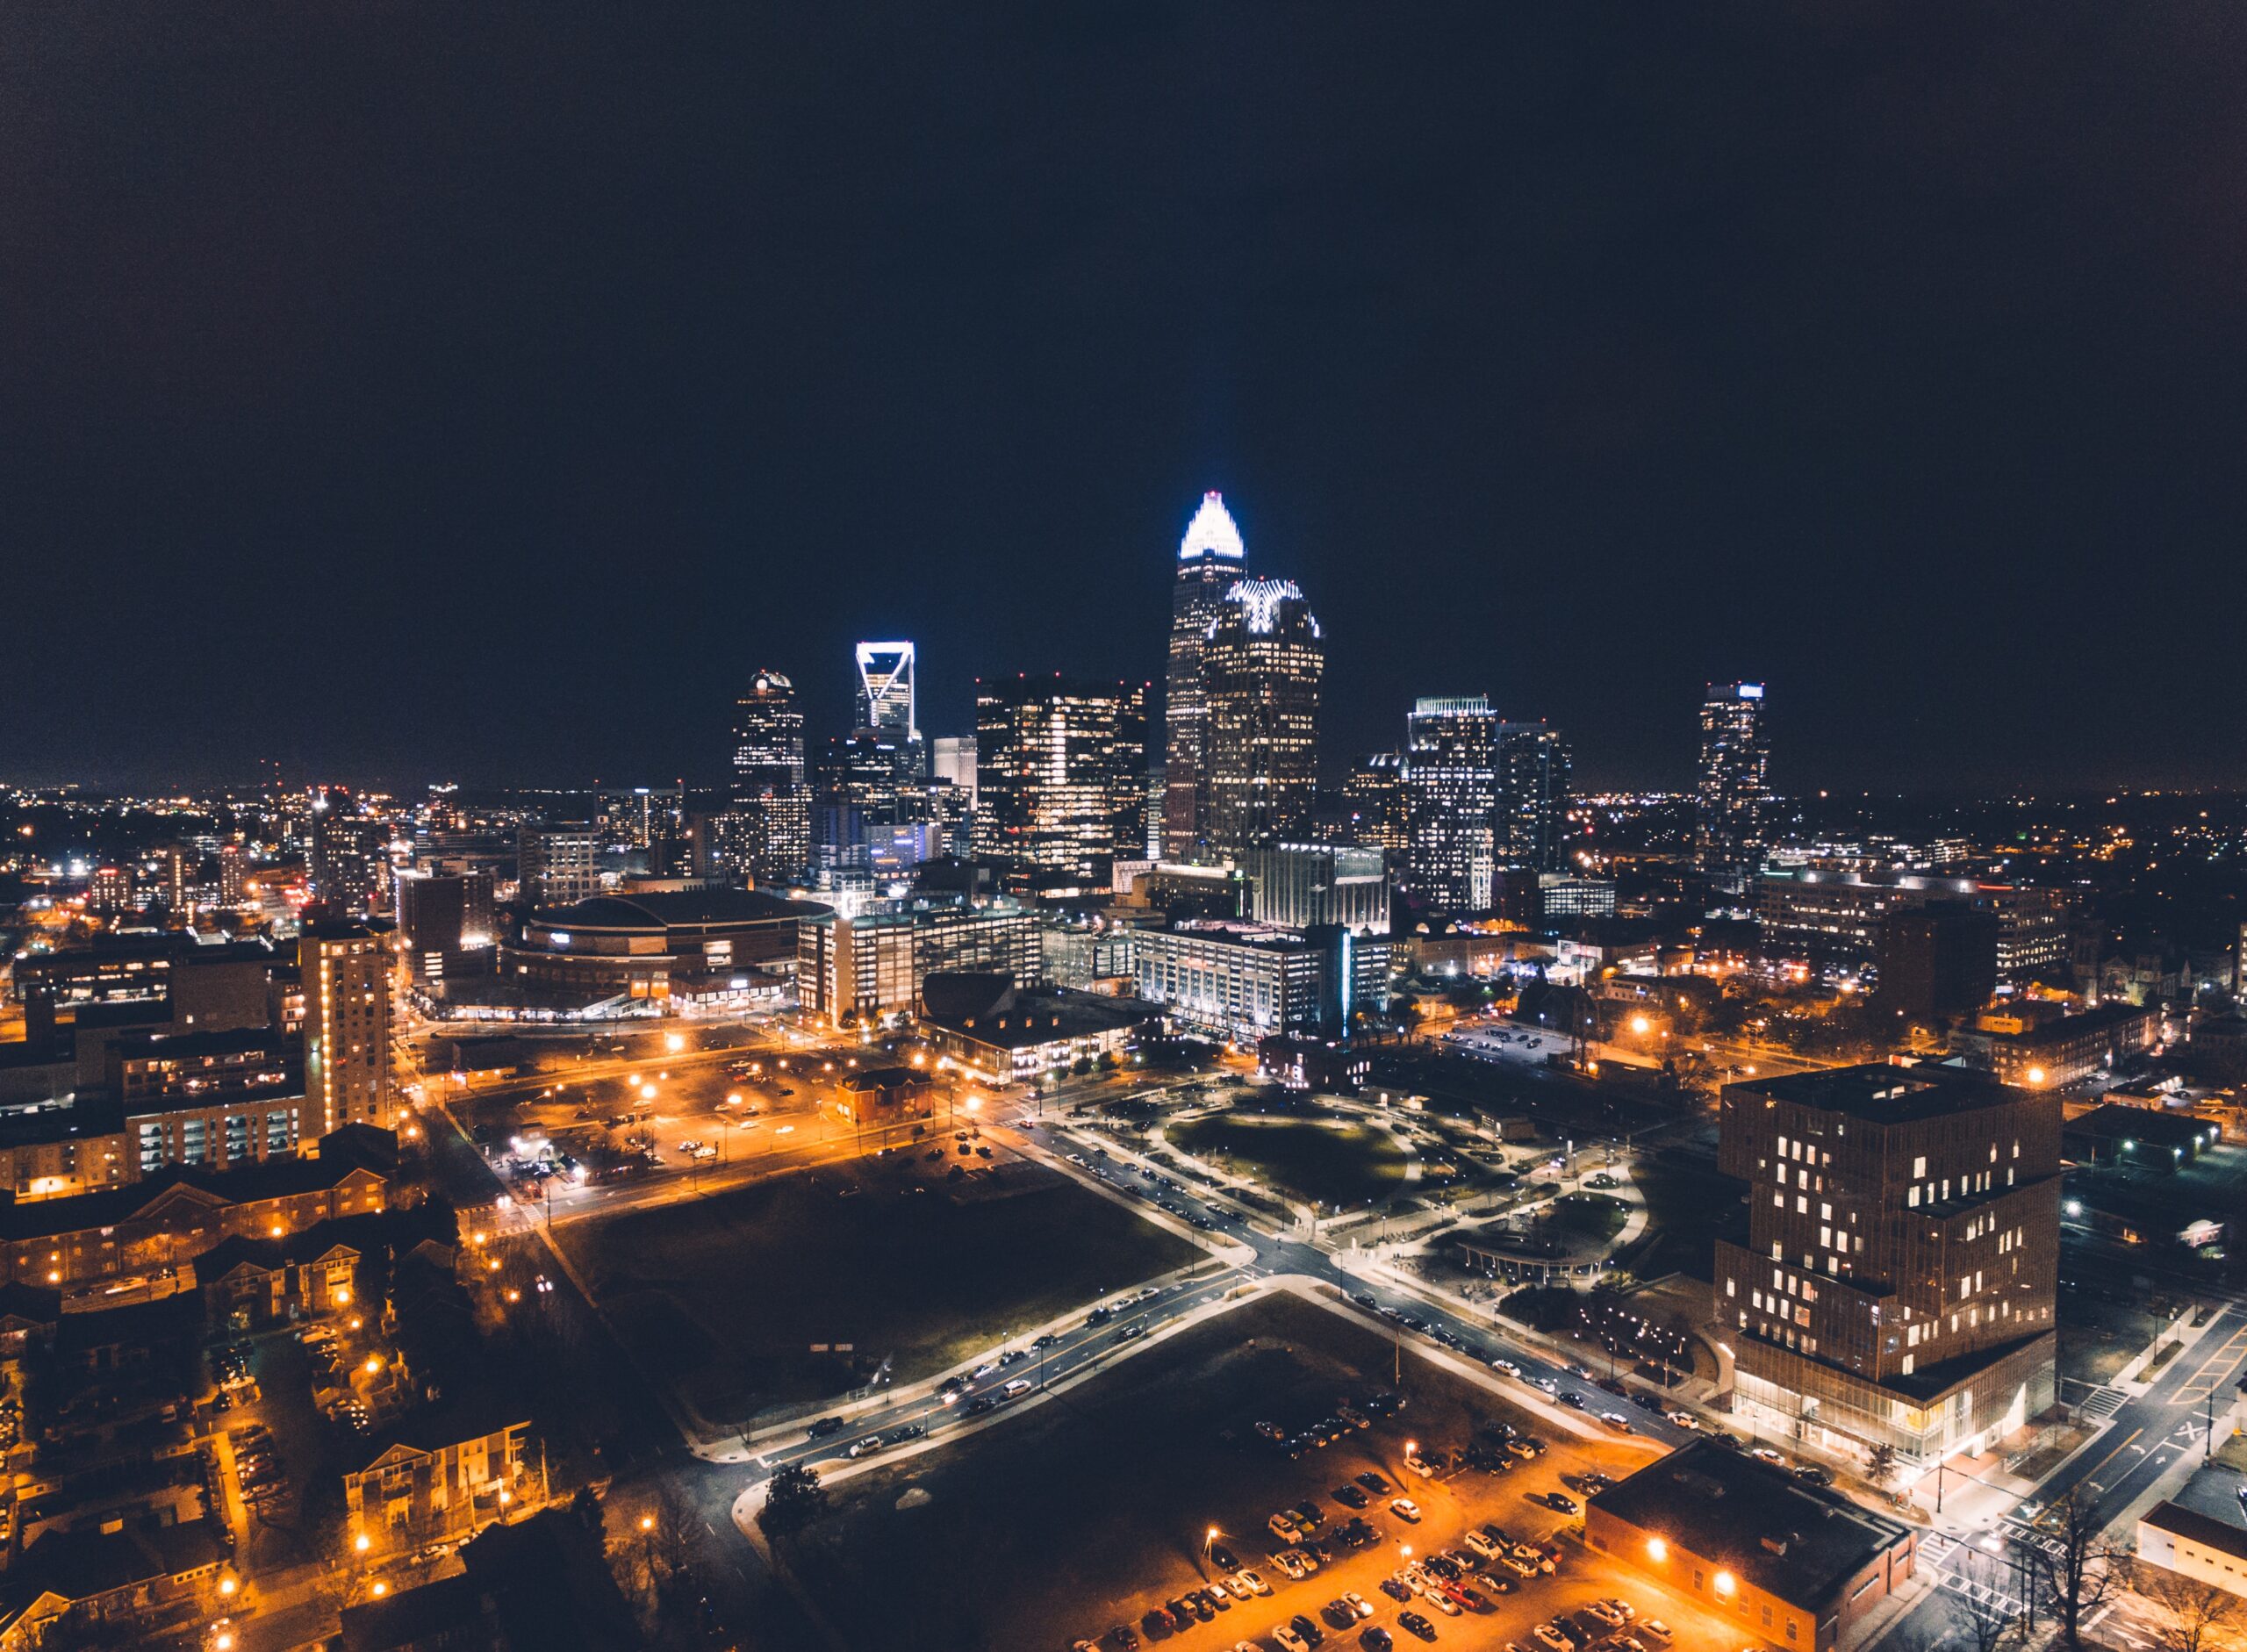 Referred to as the 'Black Mecca' by residents, Charlotte is one of the best places for raising Black families. Pictured: Uptown Charlotte at night.